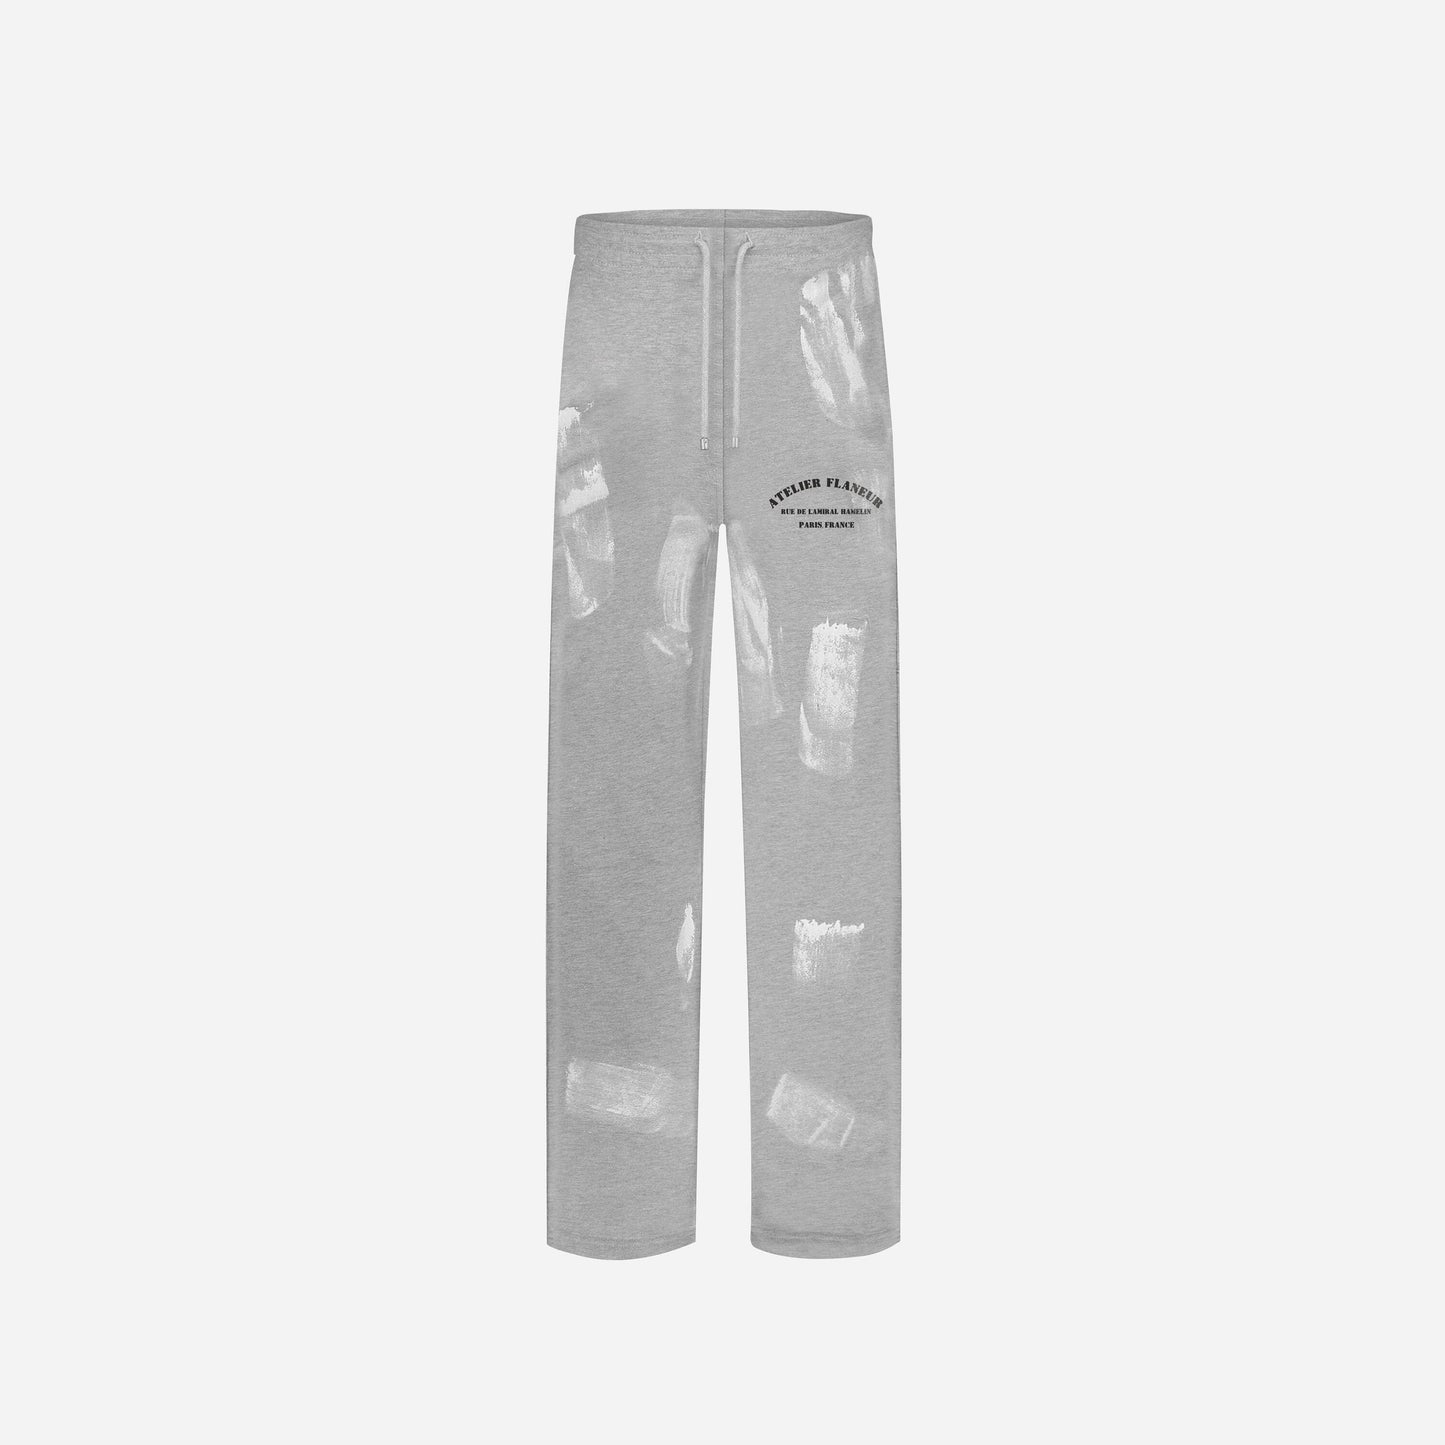 'Atelier' Sweatpants with Paint Stains in Grey